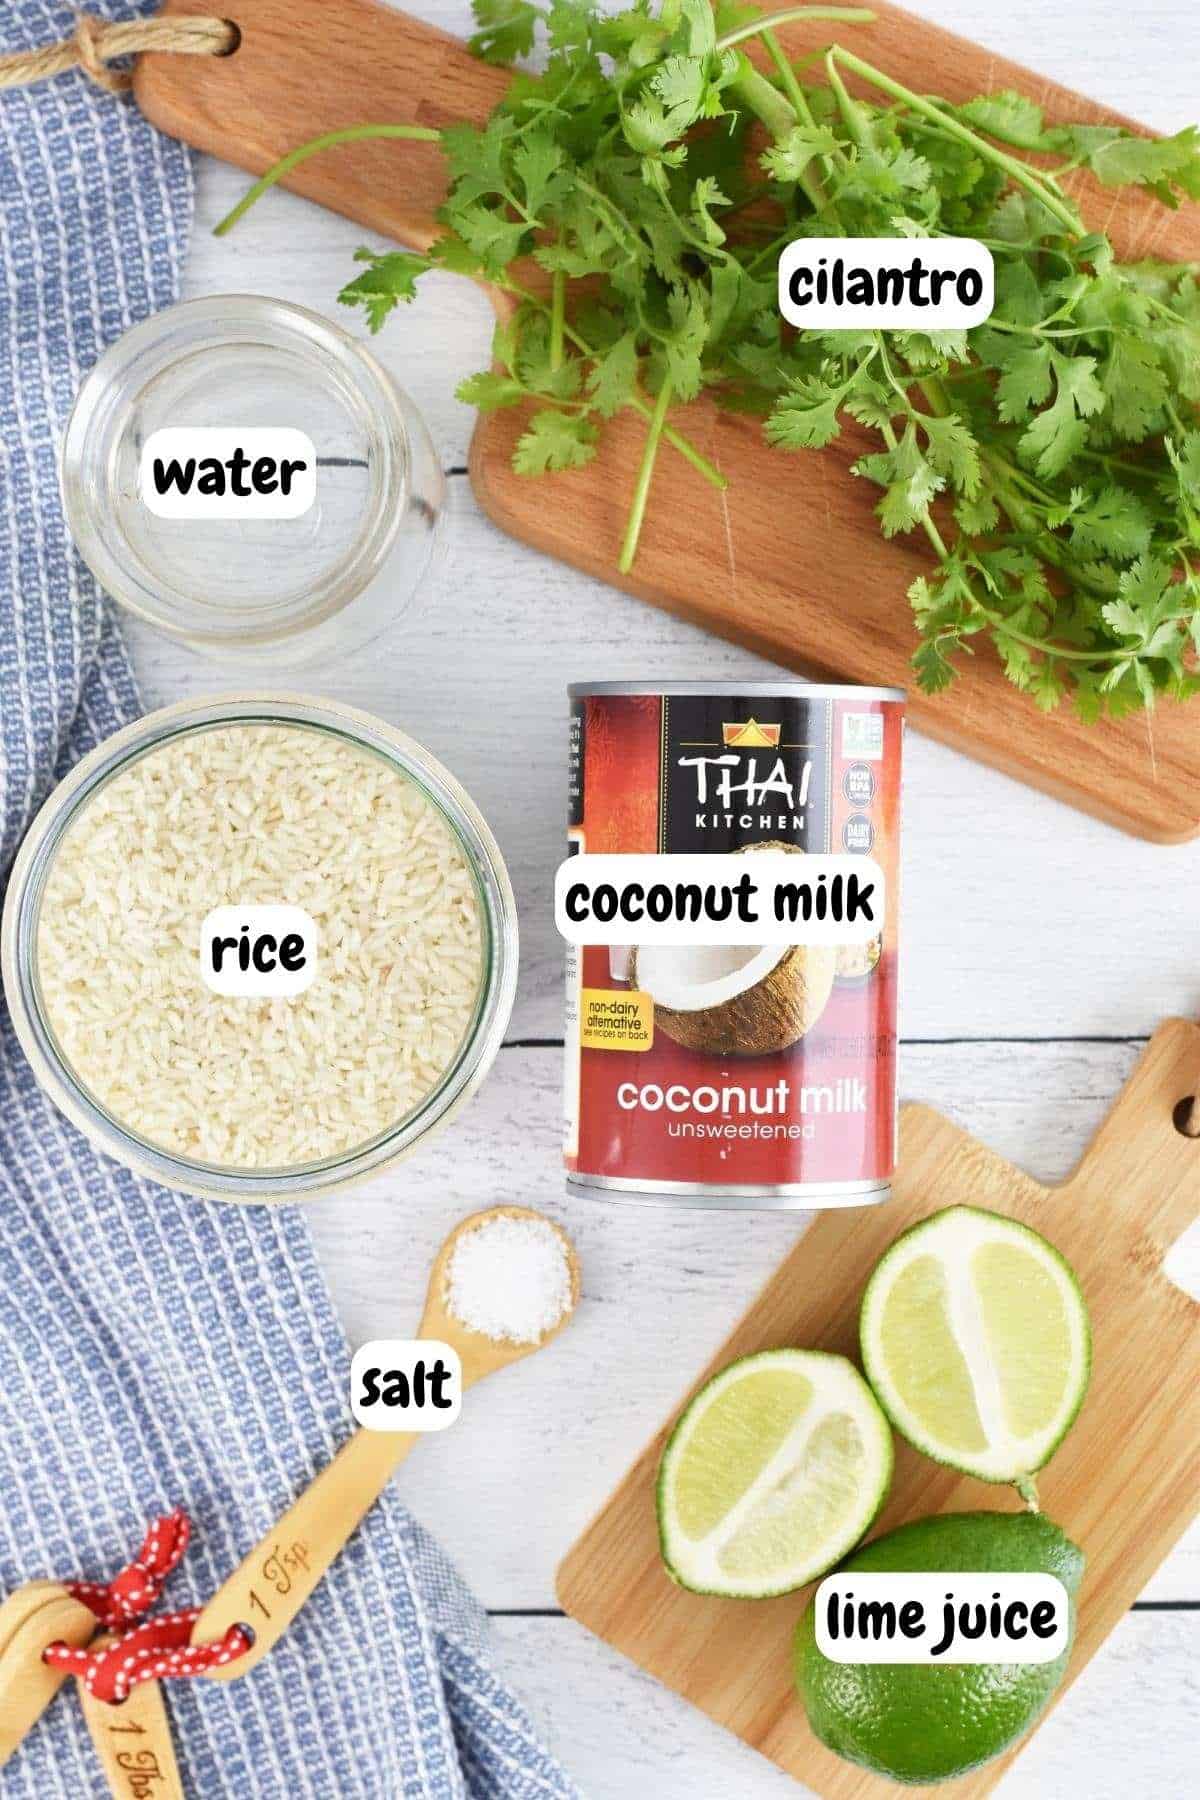 Ingredients for coconut lime rice: rice, coconut milk, lime, salt, cilantro, water 